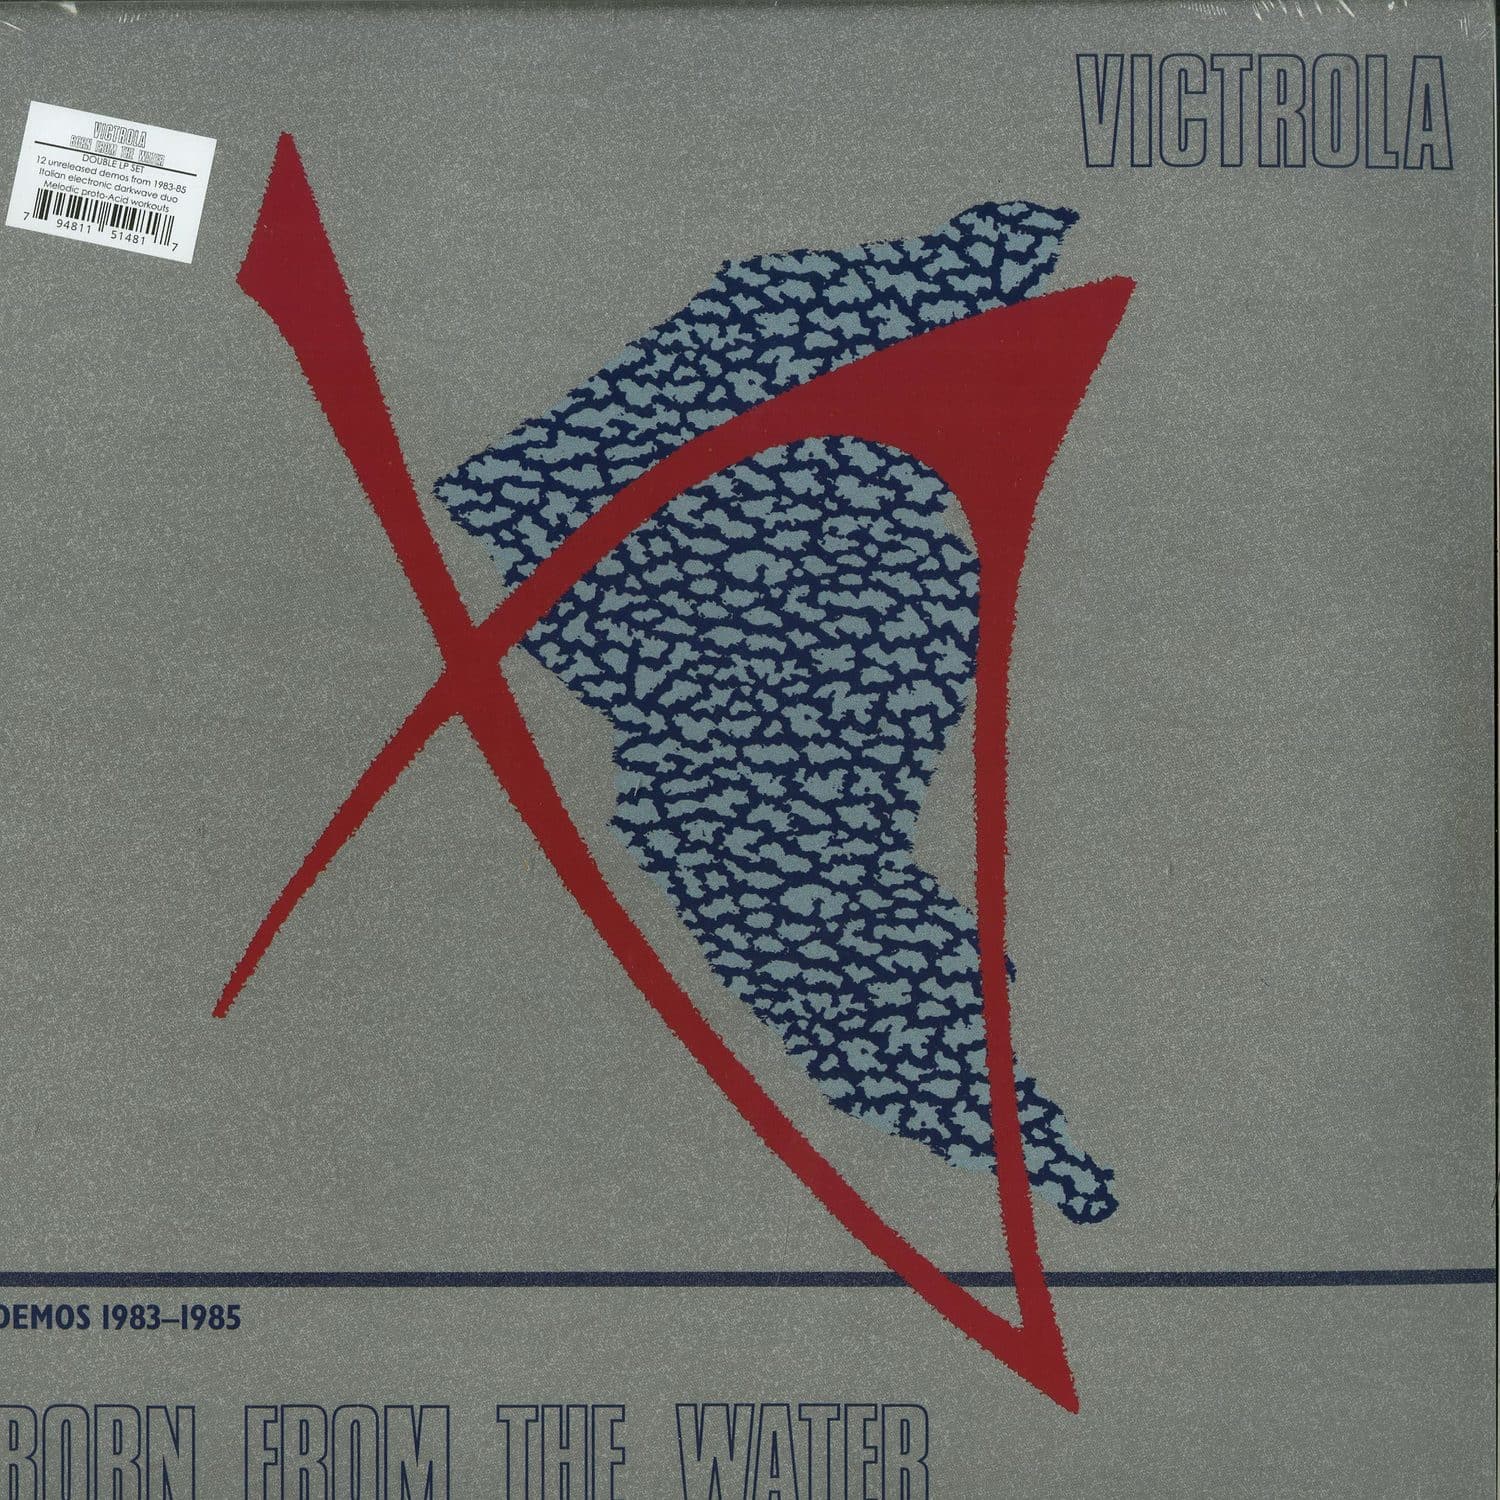 Victrola - BORN FROM THE WATER - DEMOS 1983-85 